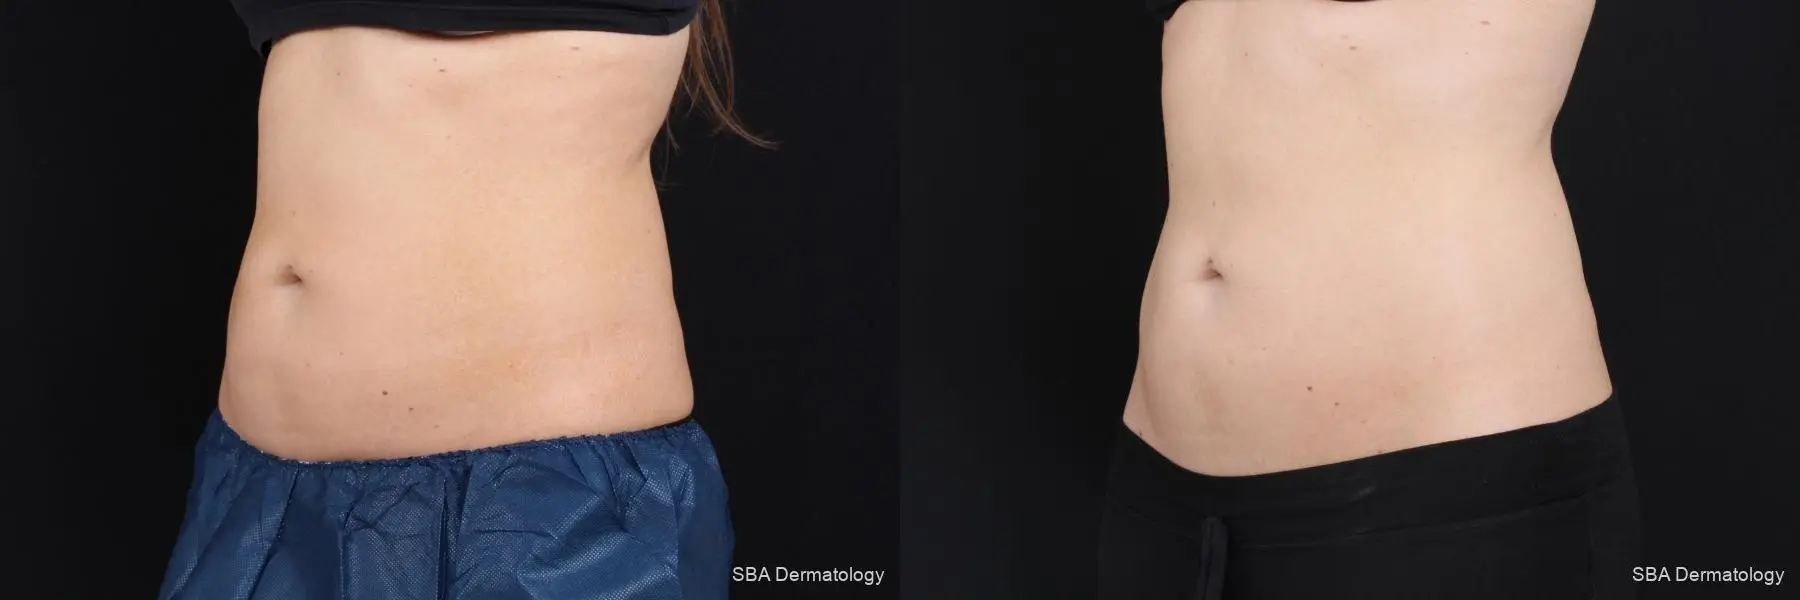 Coolsculpting: Patient 7 - Before and After 2